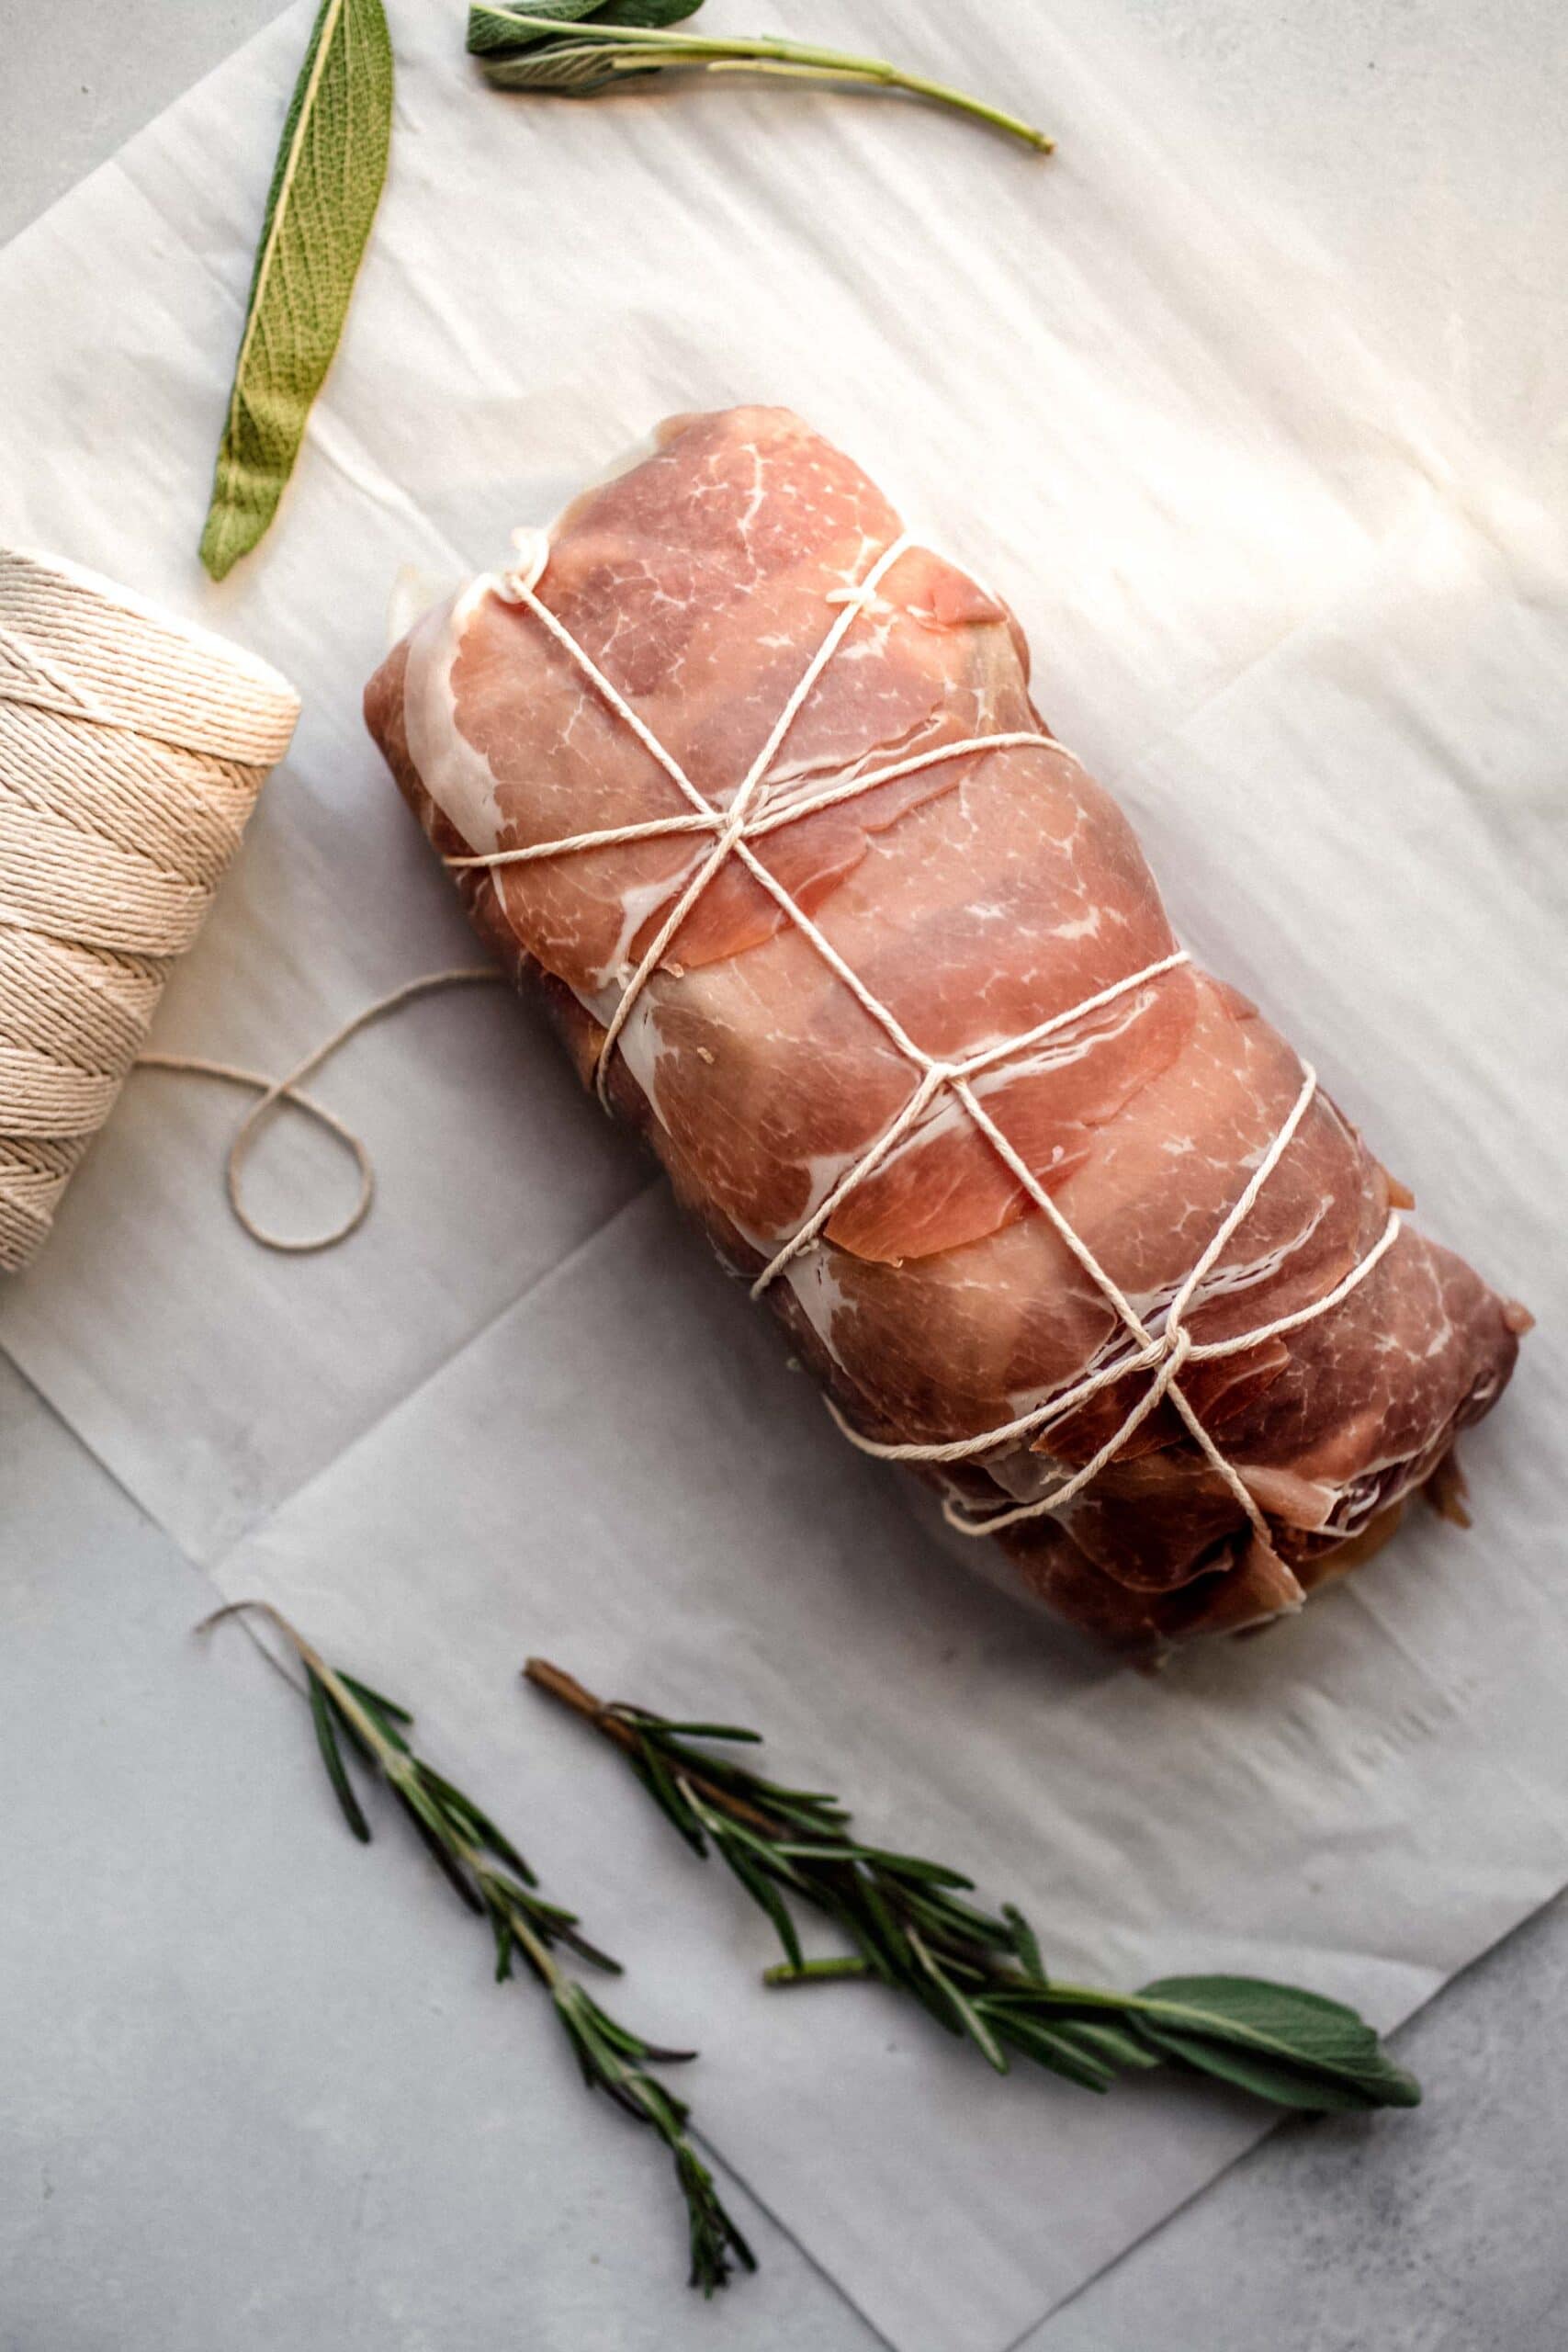 Wrapped pork loin tied with twine.